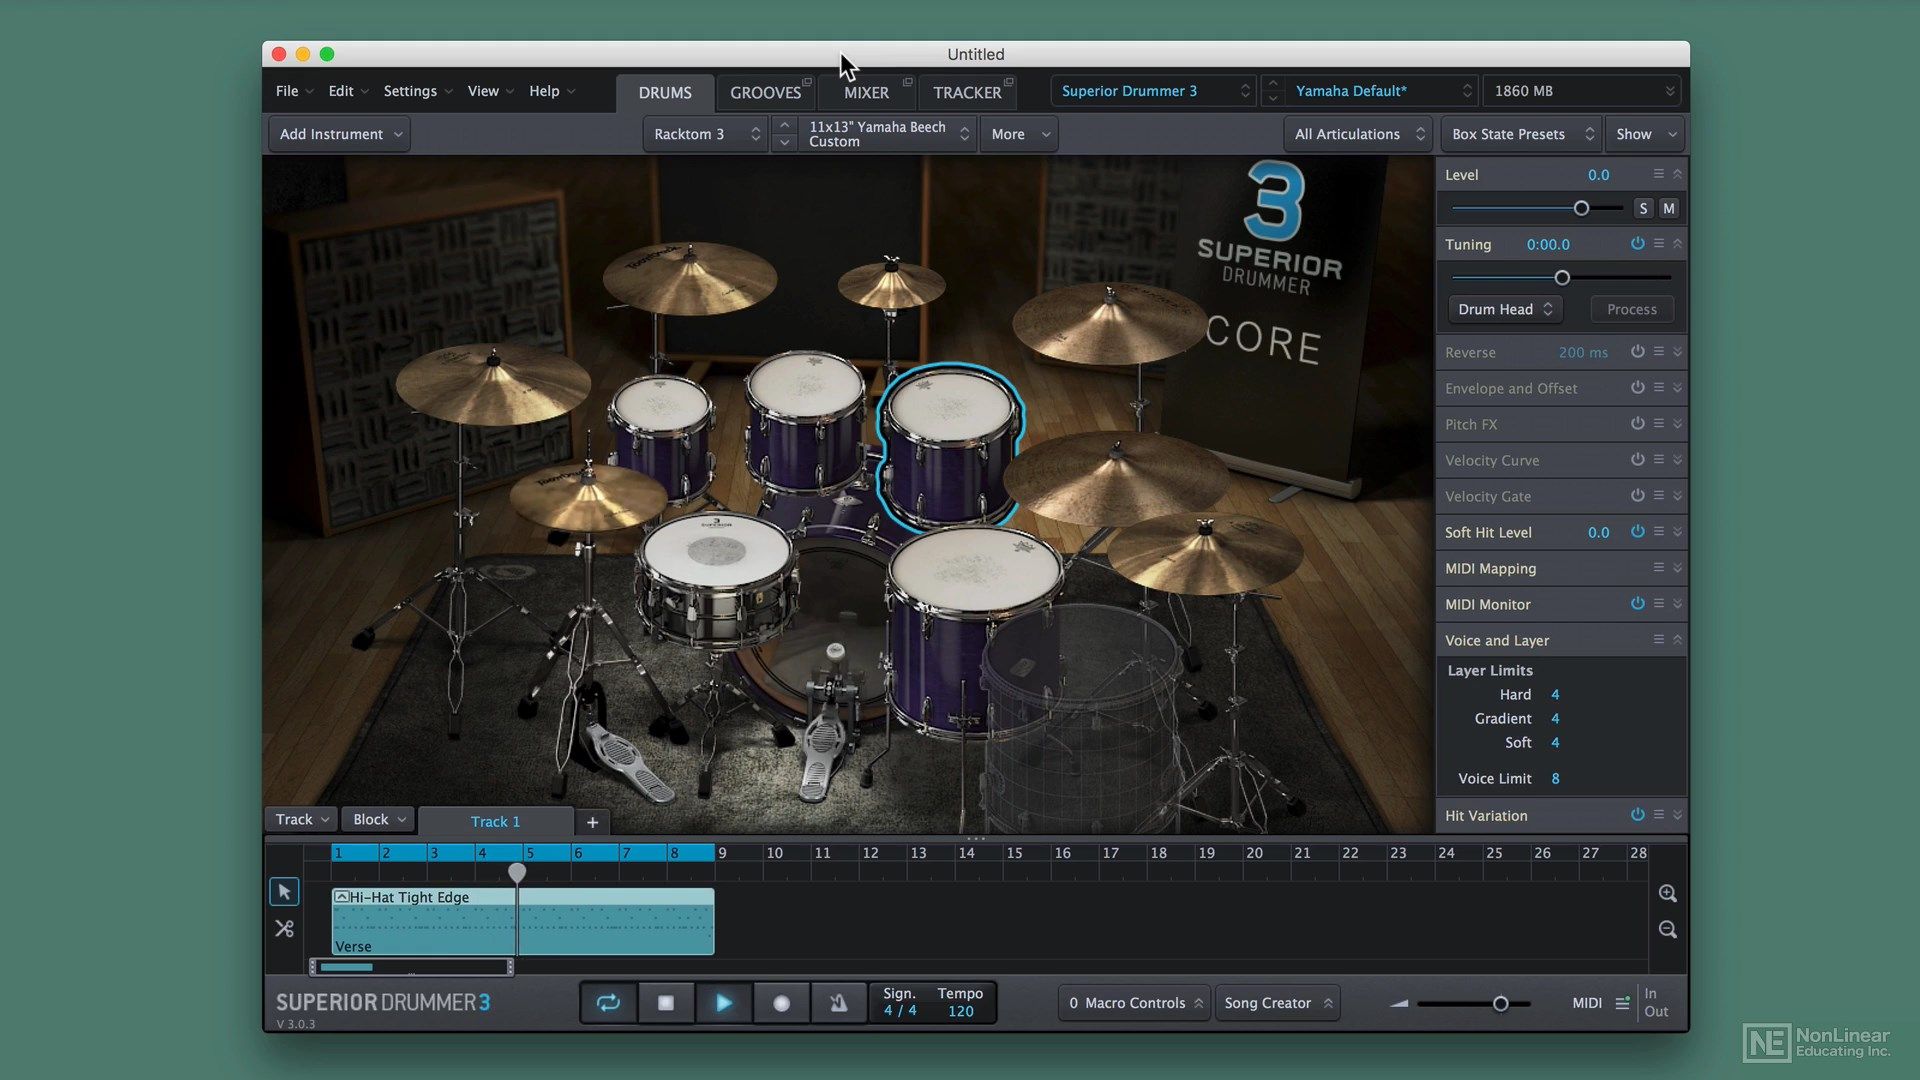 More Killer Drums Course By mPV